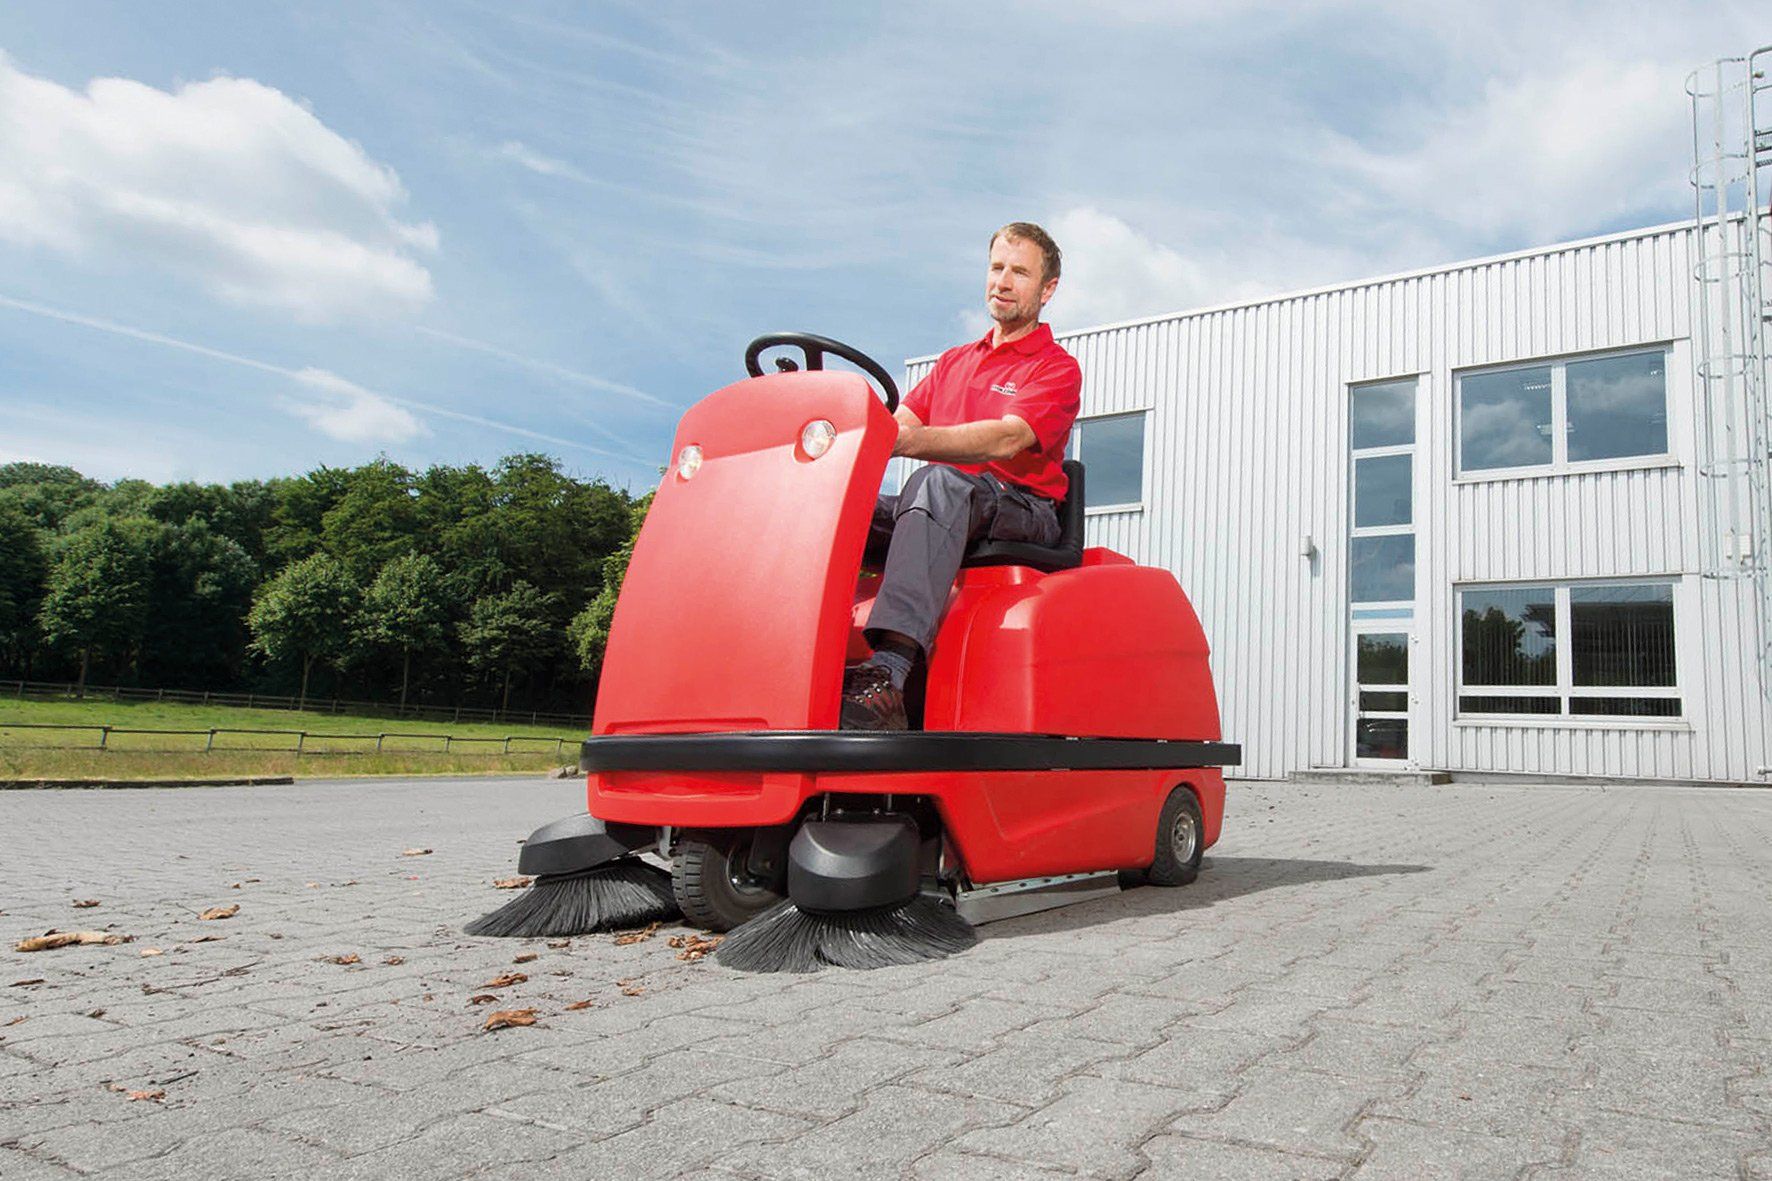 Meclean ride-on sweepers / suction machines